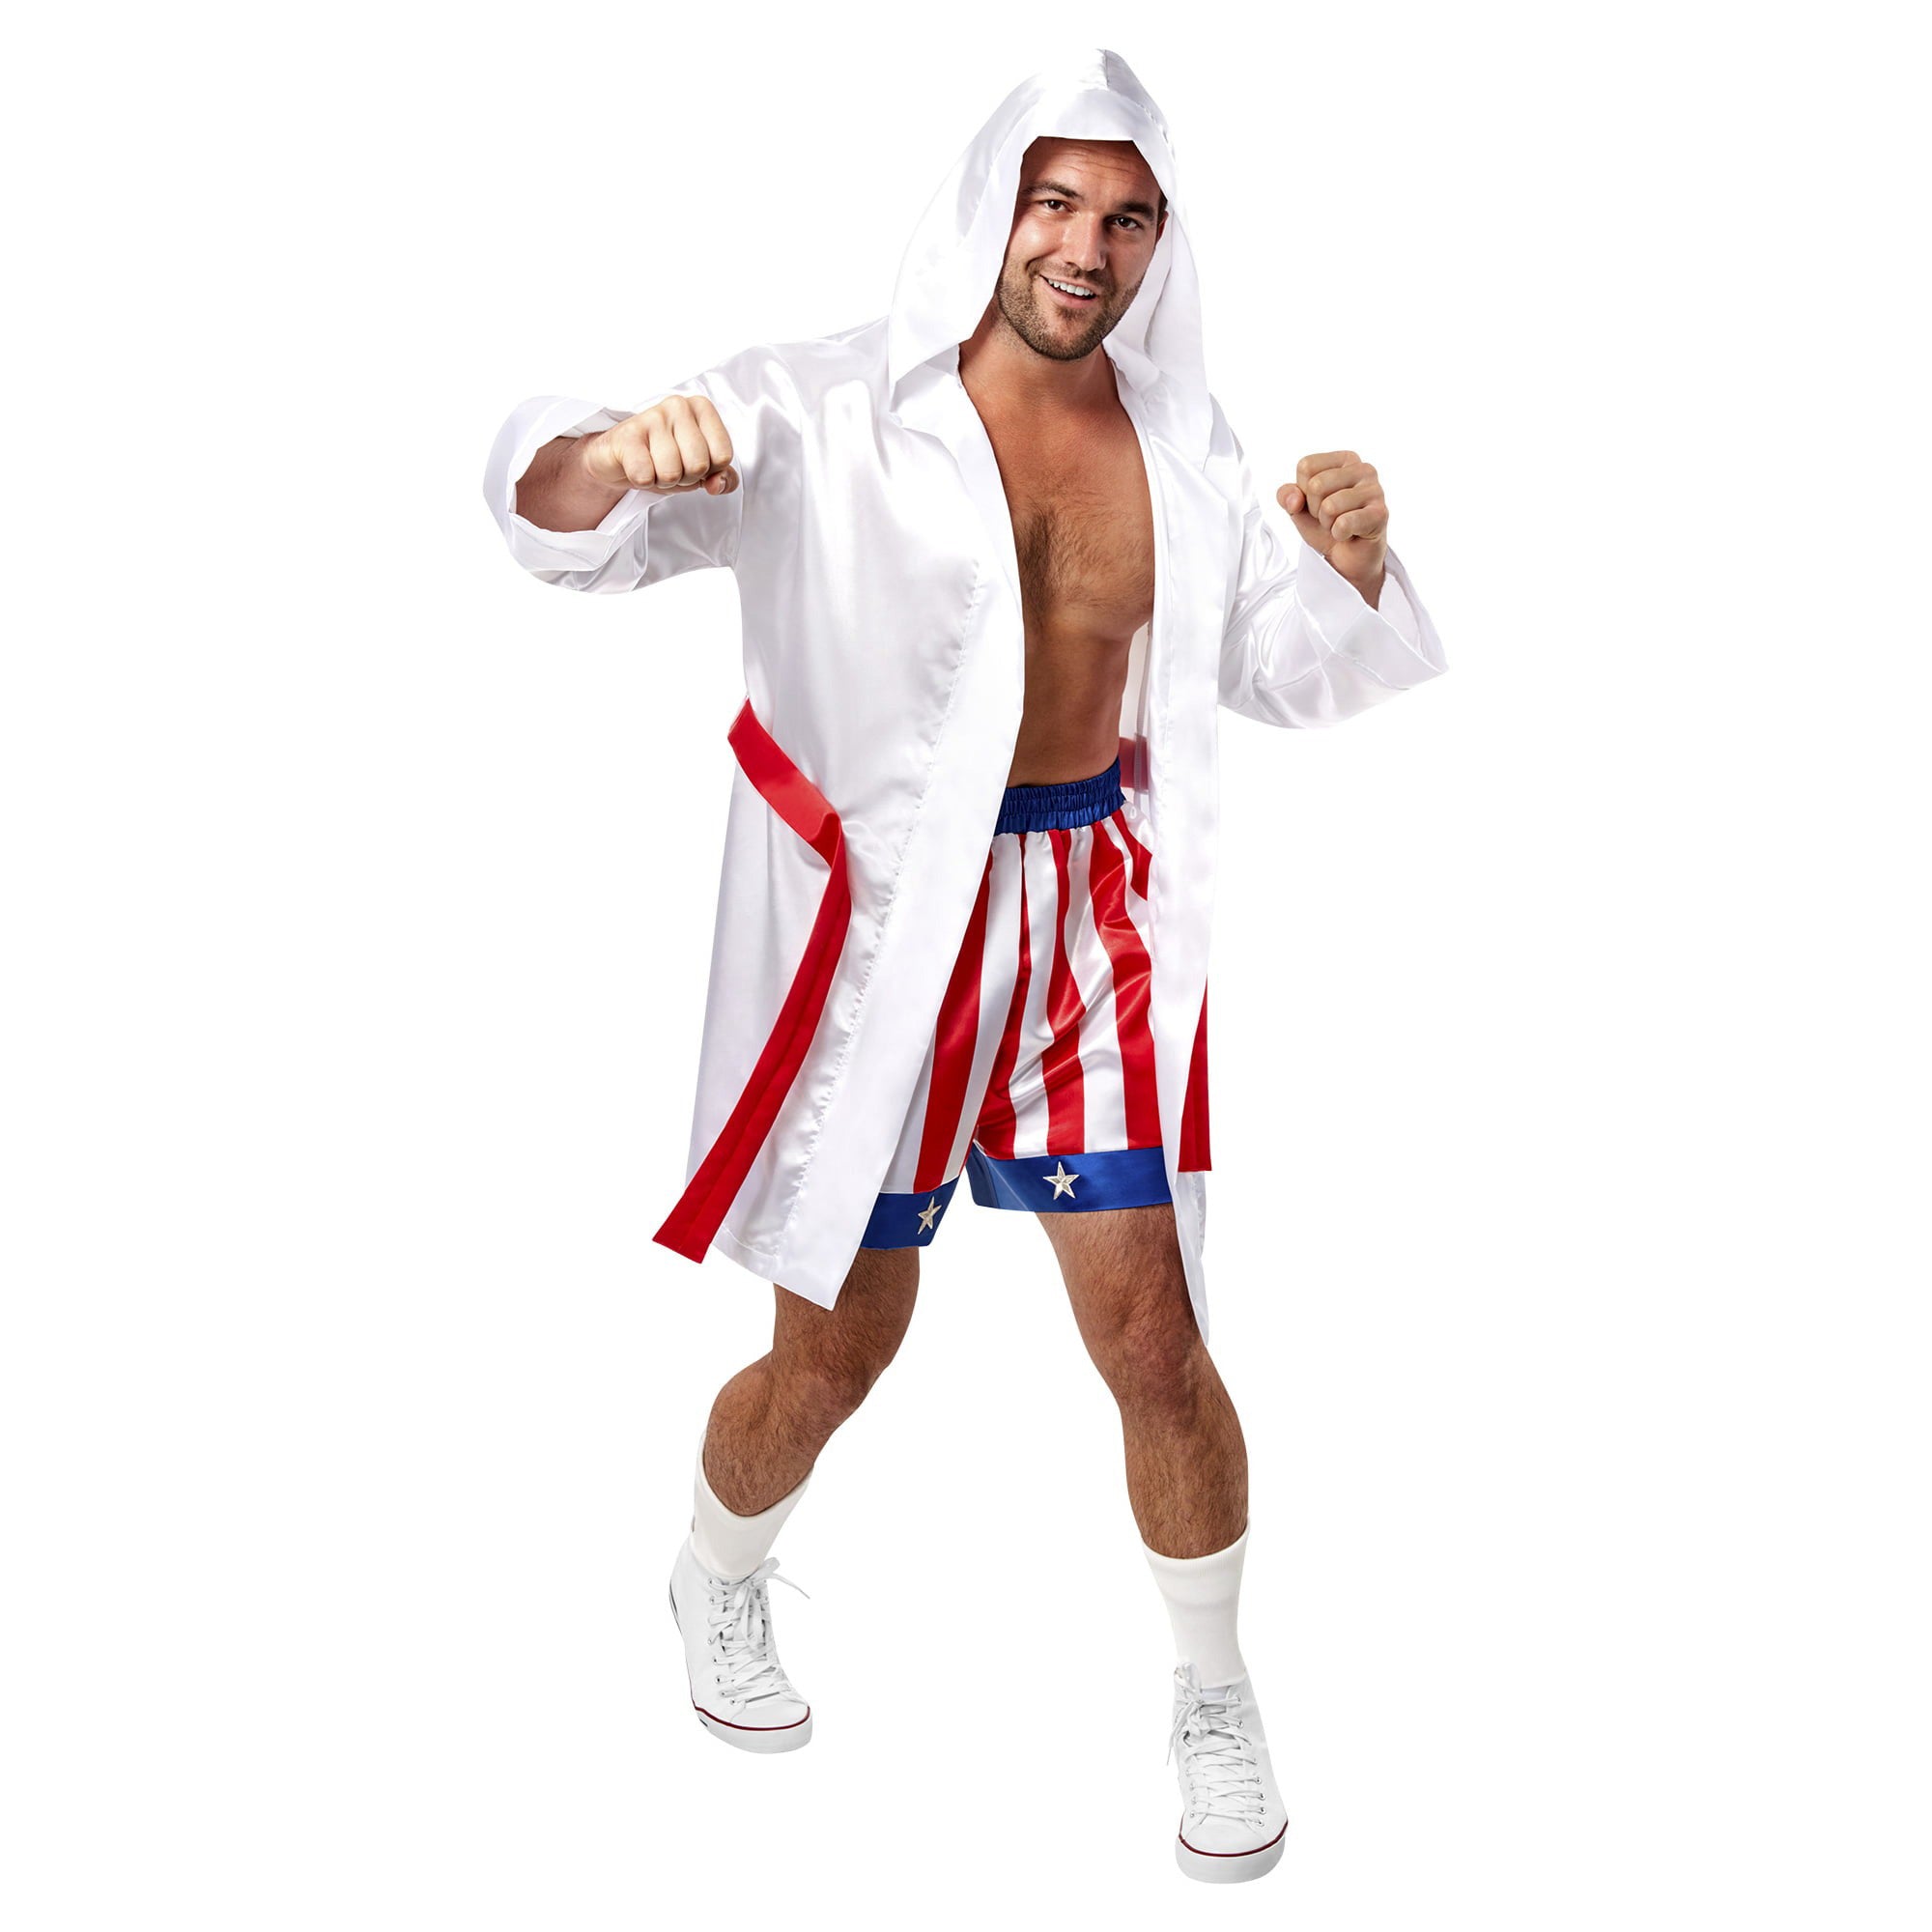 Rocky Balboa Costume for Adults, White Robe and Shorts | Party Expert